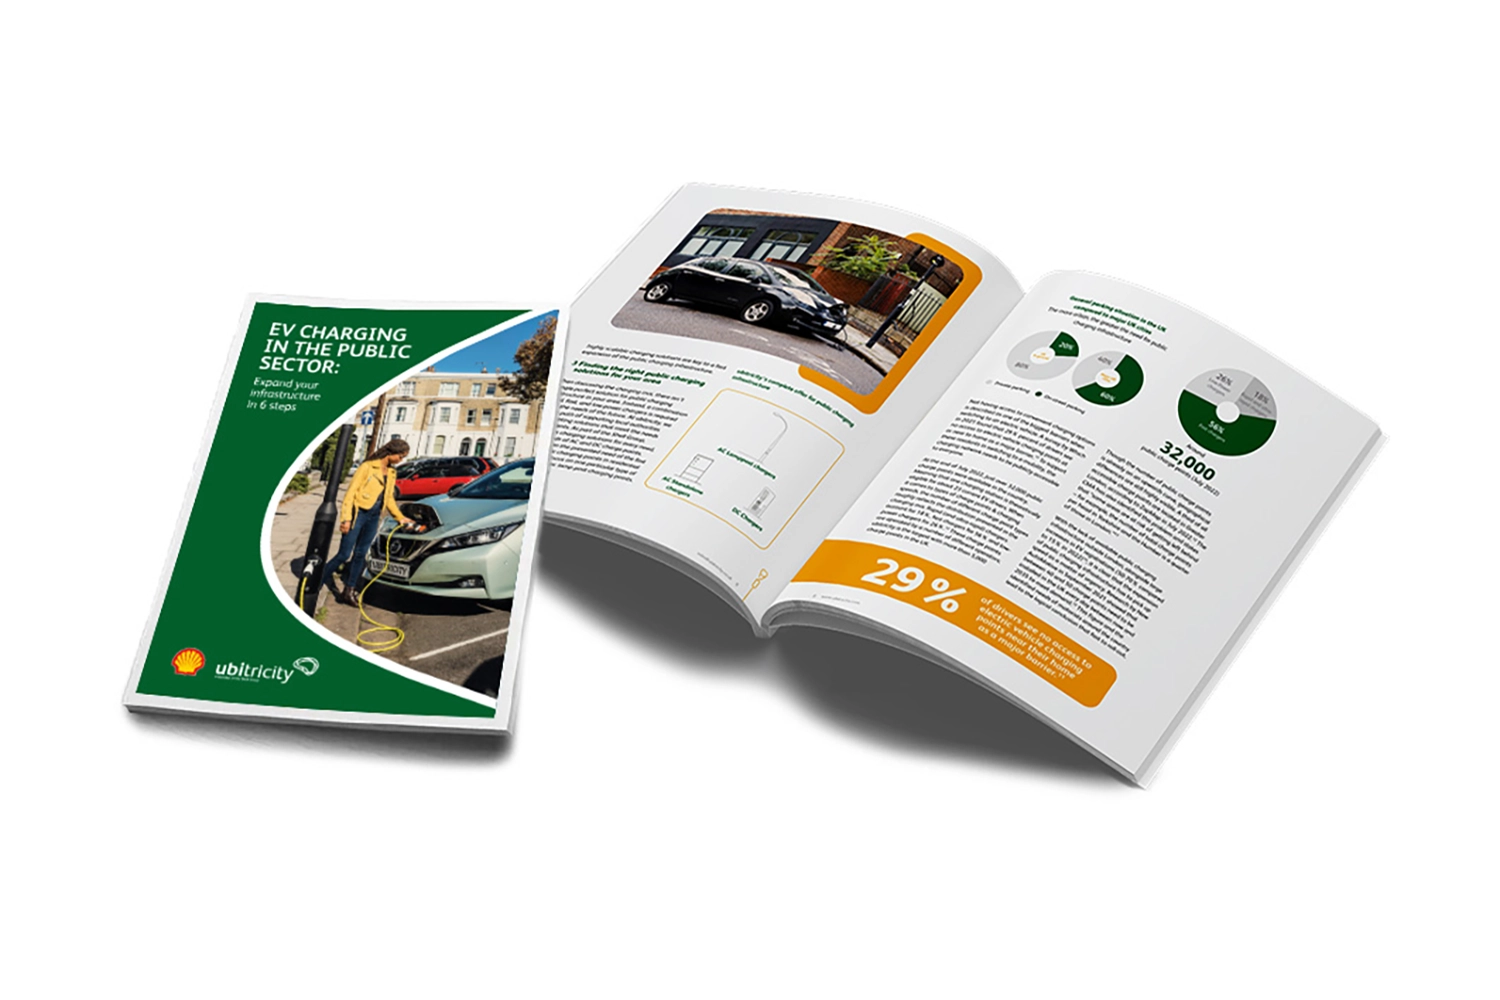 ubitricity infrastructure guide for the expansion of public charging stations for electric vehicles can be downloaded for free.